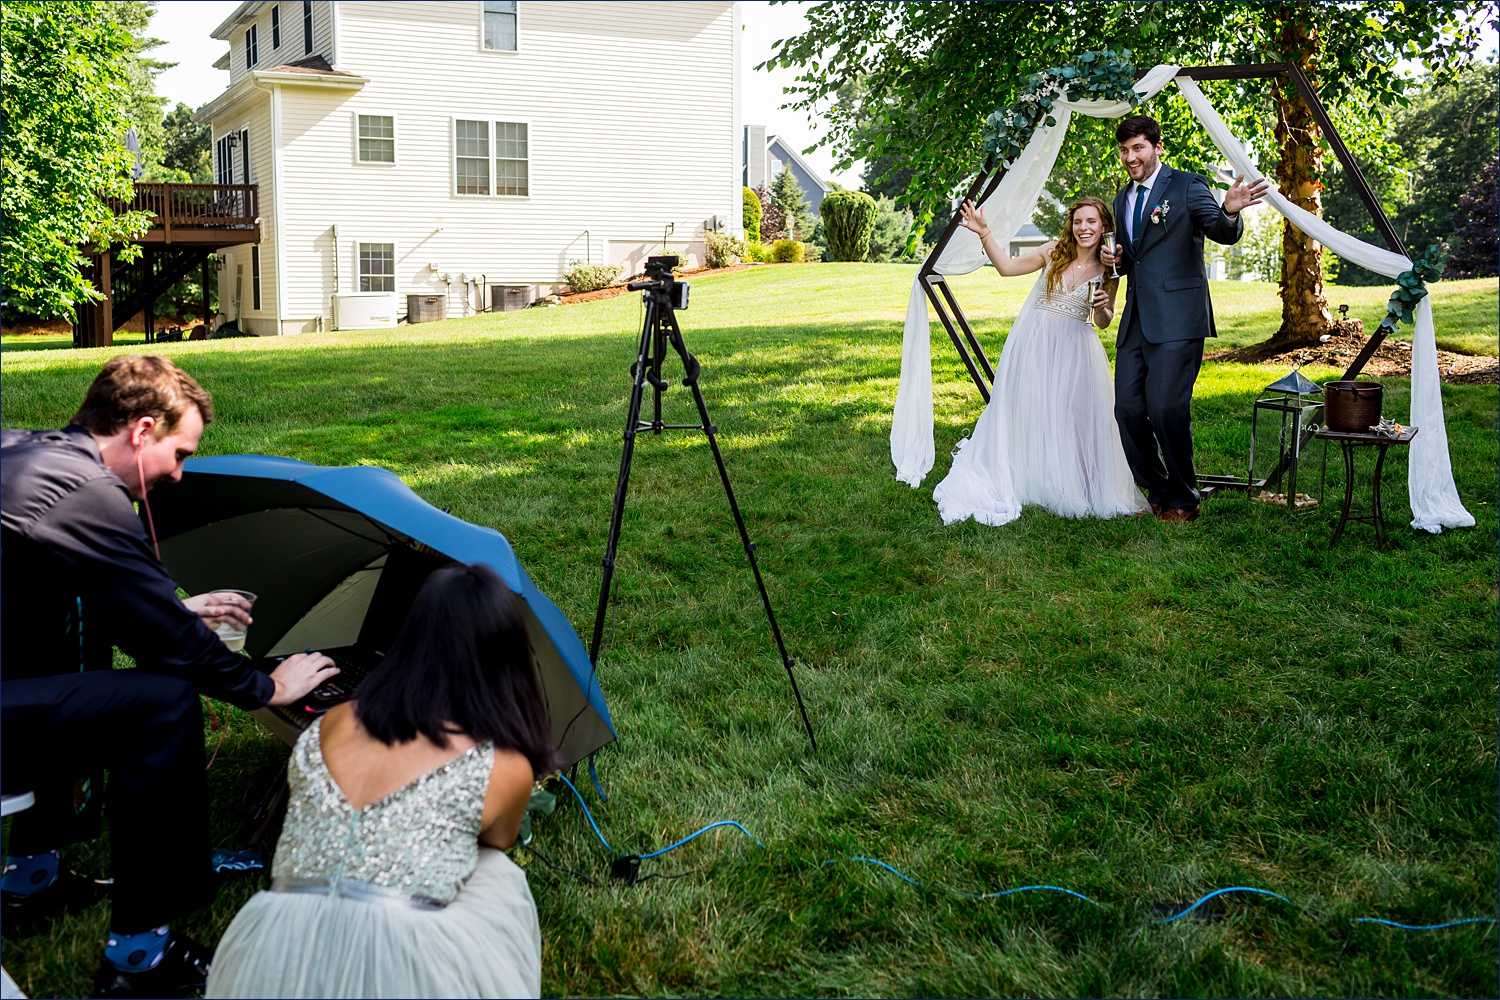 The newlyweds sign off of the Zoom call with family and friends after their backyard intimate wedding in Andover MA